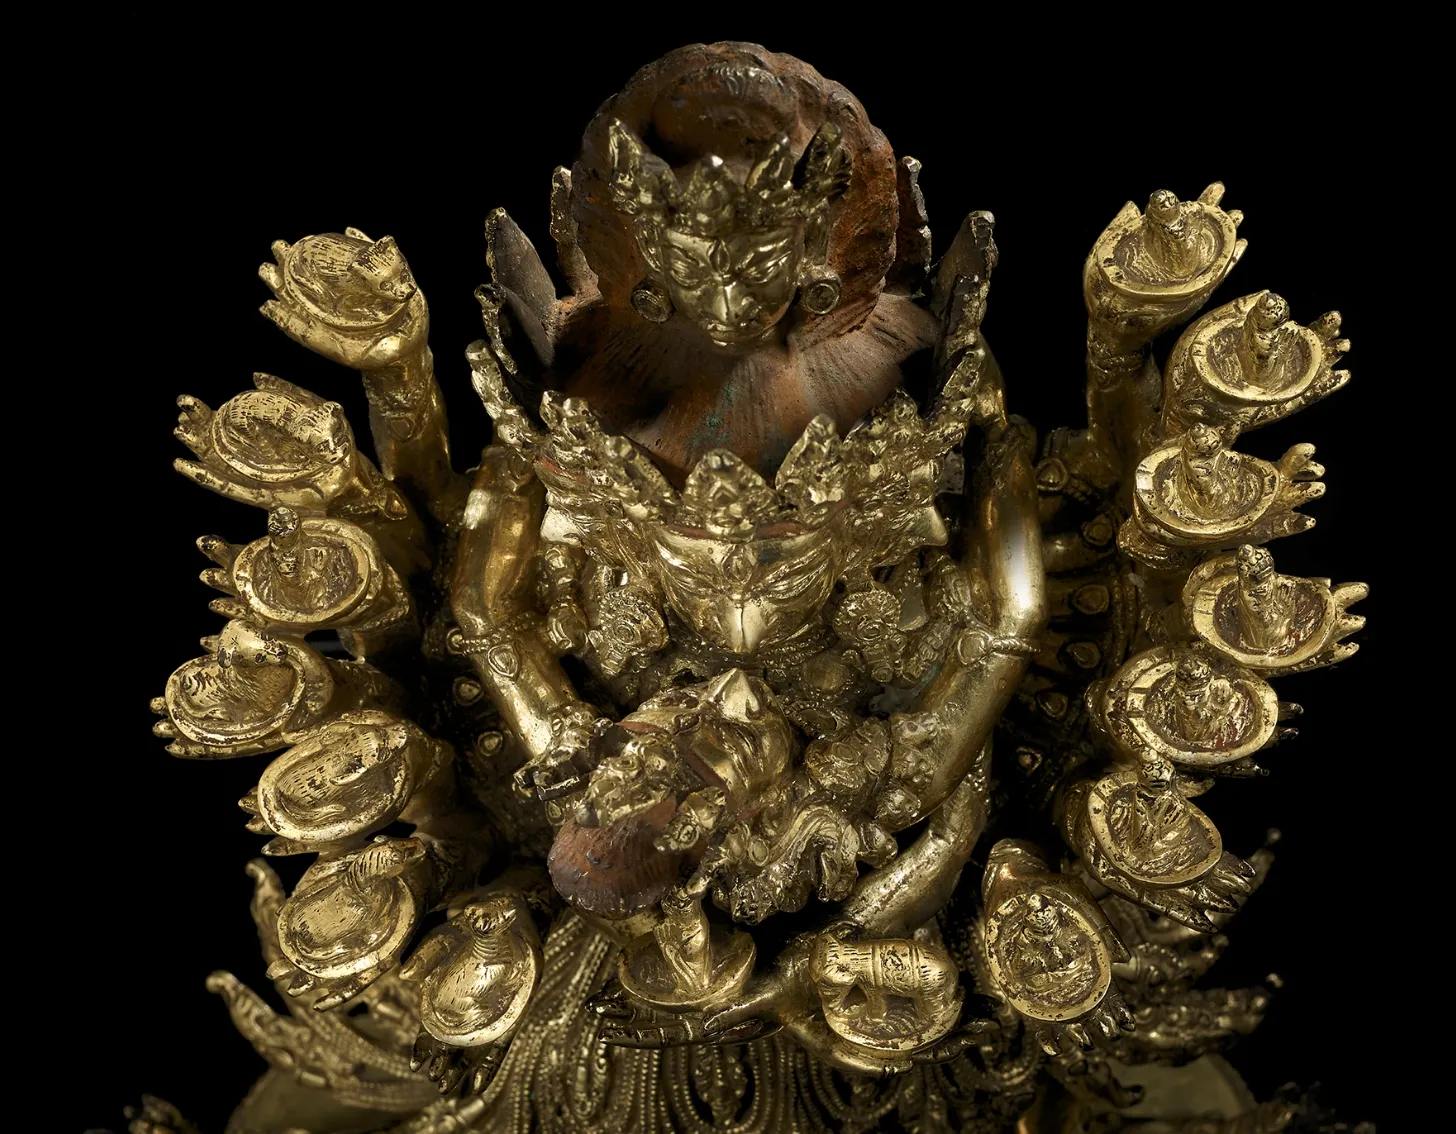 Close up look of : A gilt copper alloy figure of Kapaladhara Hevajra